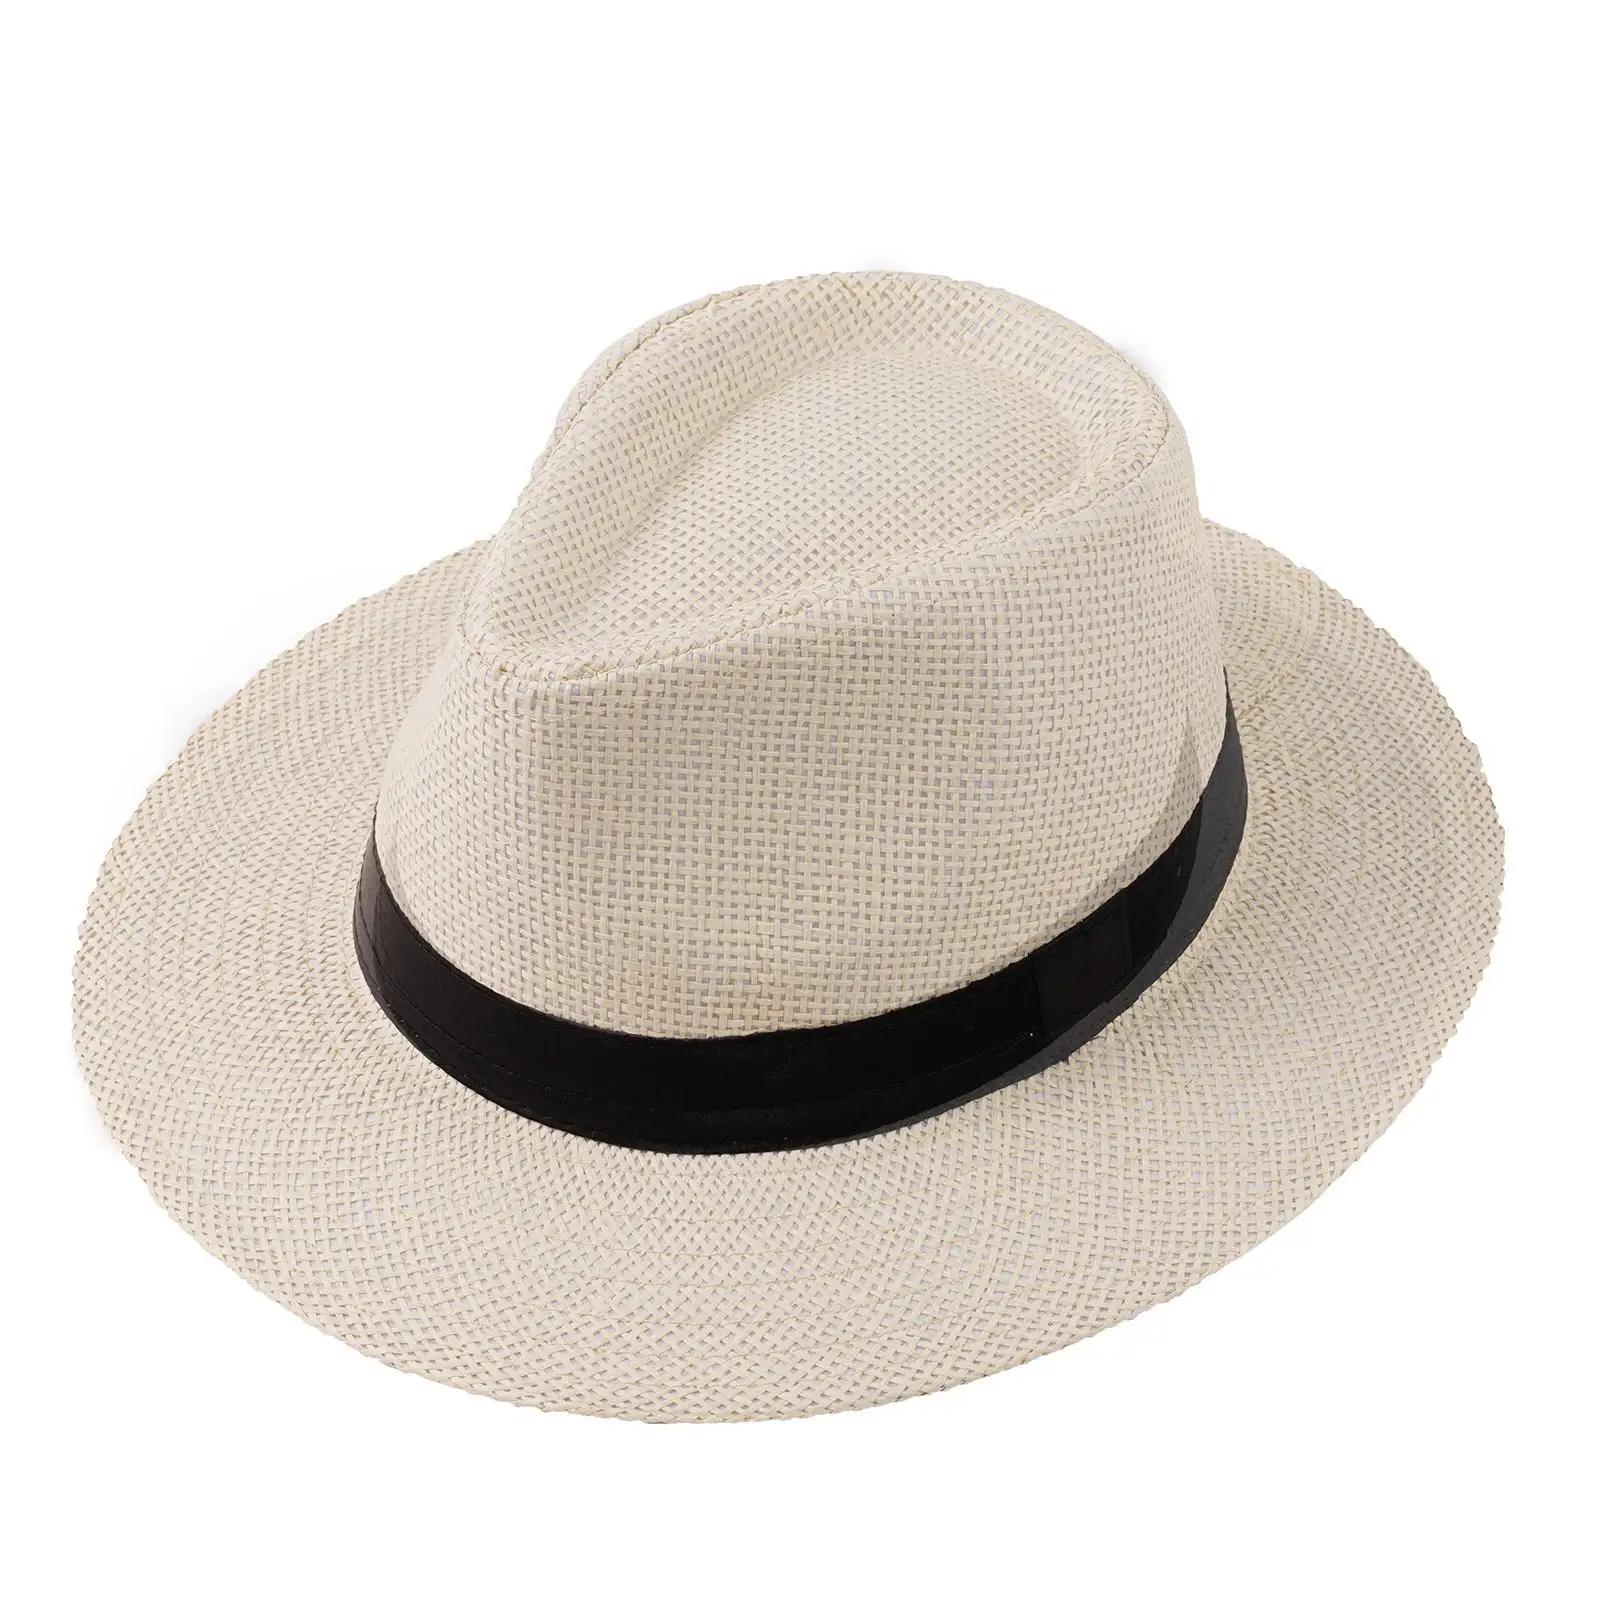 Big Head Panaman Straw Hat with Foldable Straw Woven Hat for Man Women Fedoras Ribbon Casual Cowboy Jazz Cap